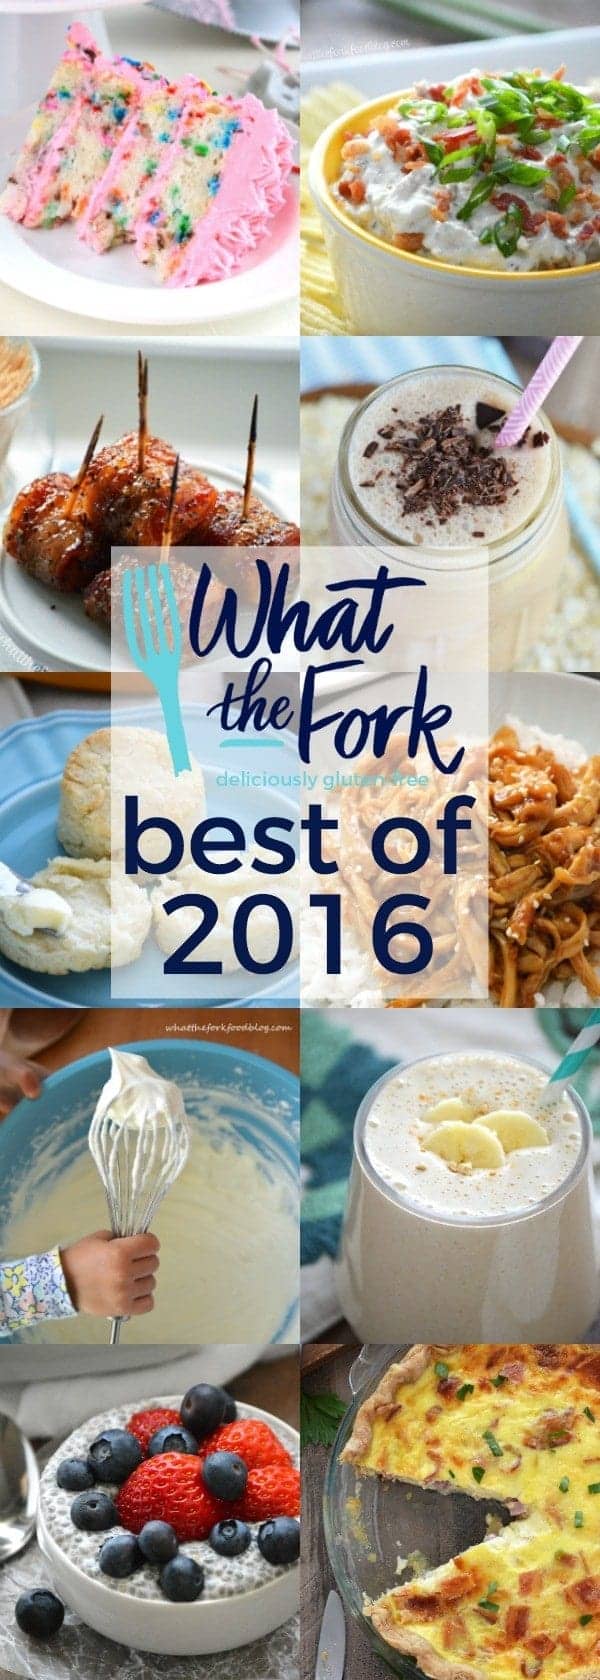 What The Fork's top posts from 2016 from @whattheforkblog | whattheforkfoodblog.com | gluten free recipes | best gluten free | popular recipes